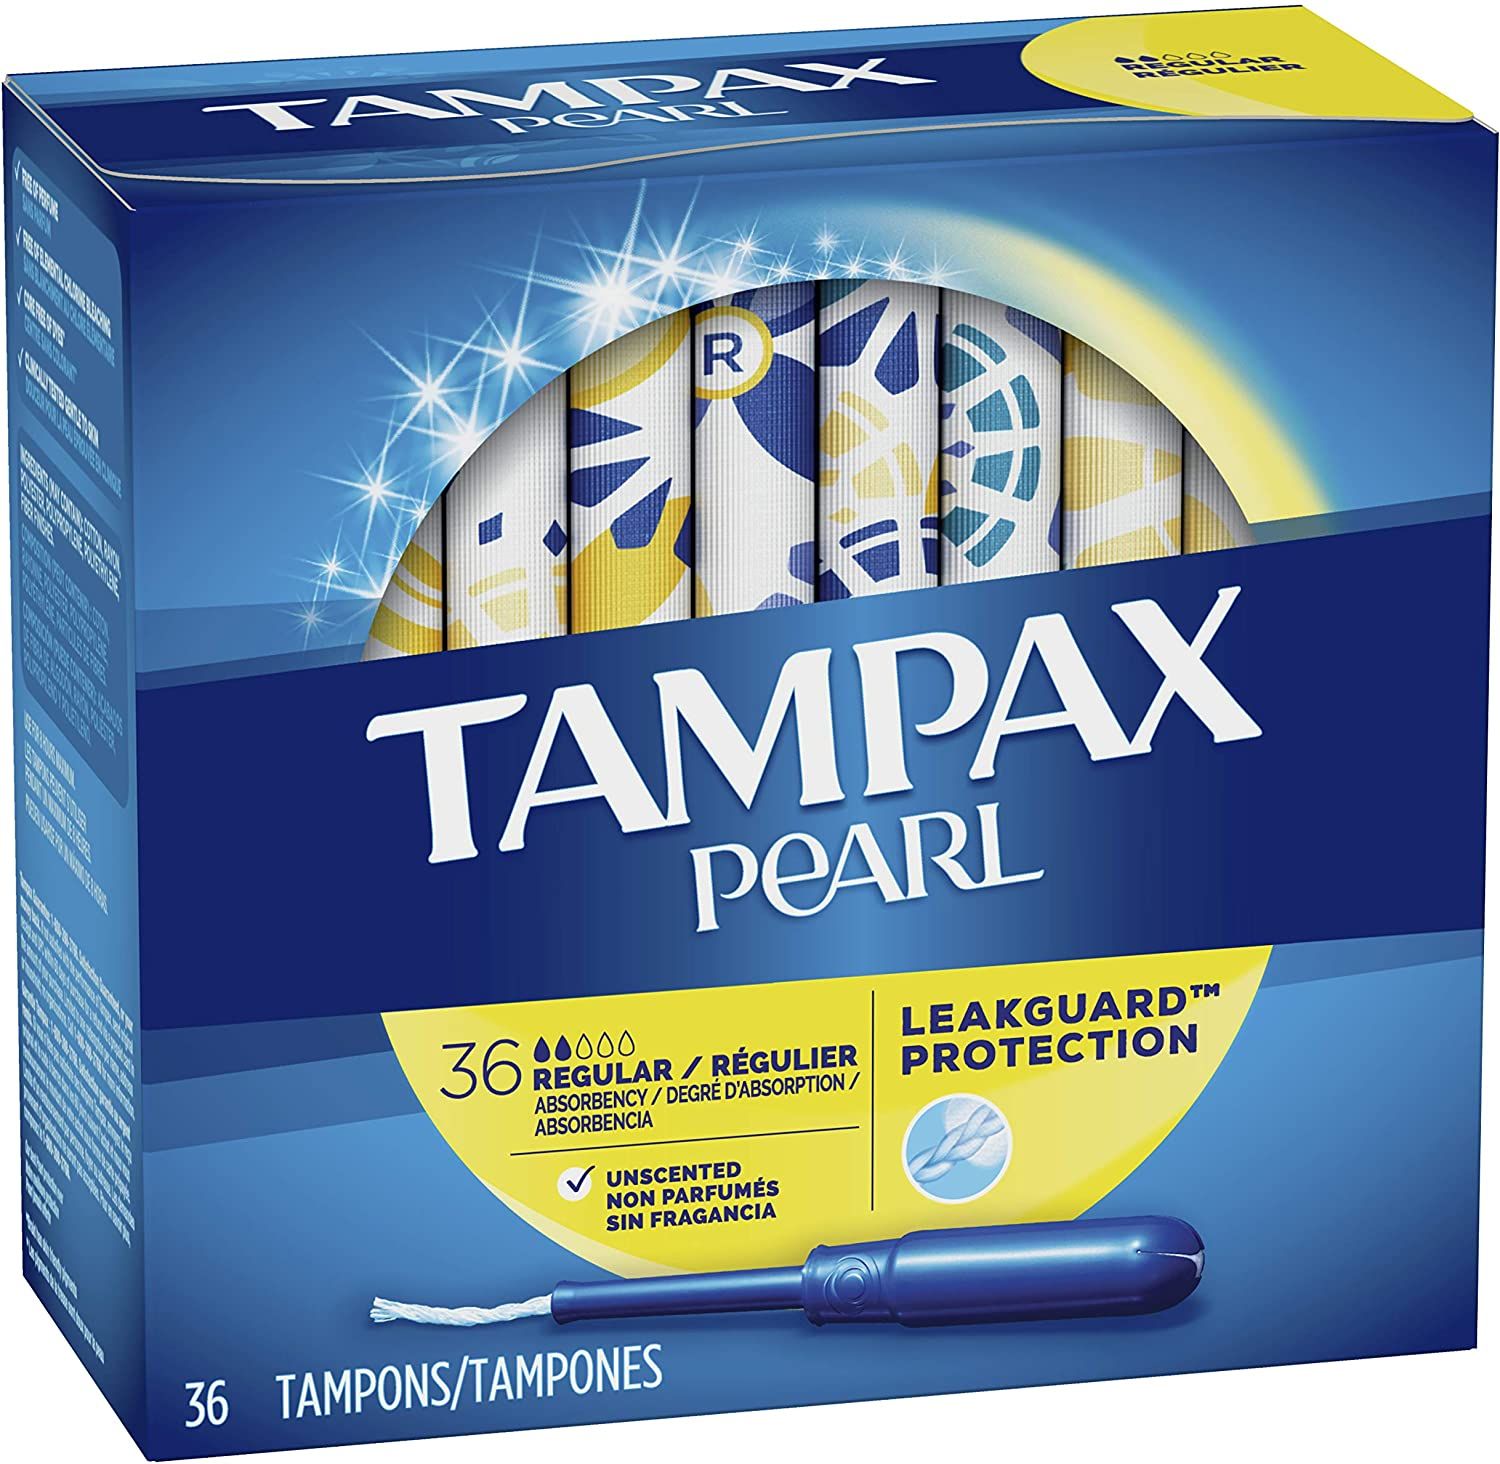 Tampax Pearl Tampons Regular Absorbency Unscented - 36 ct